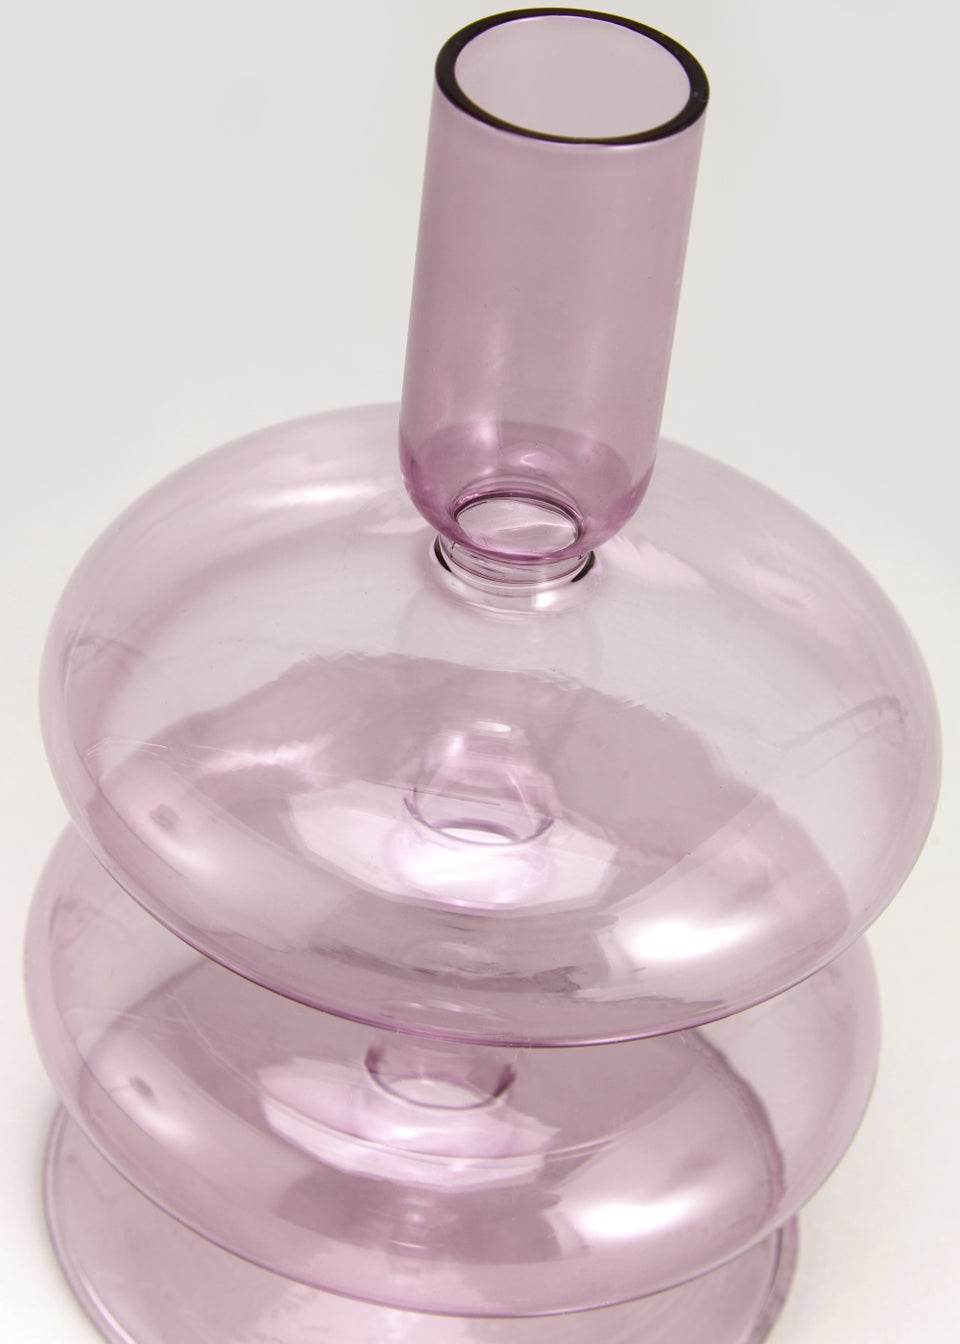 Lilac Glass Tapered Candle Holder (10cm x 10cm x 14cm)